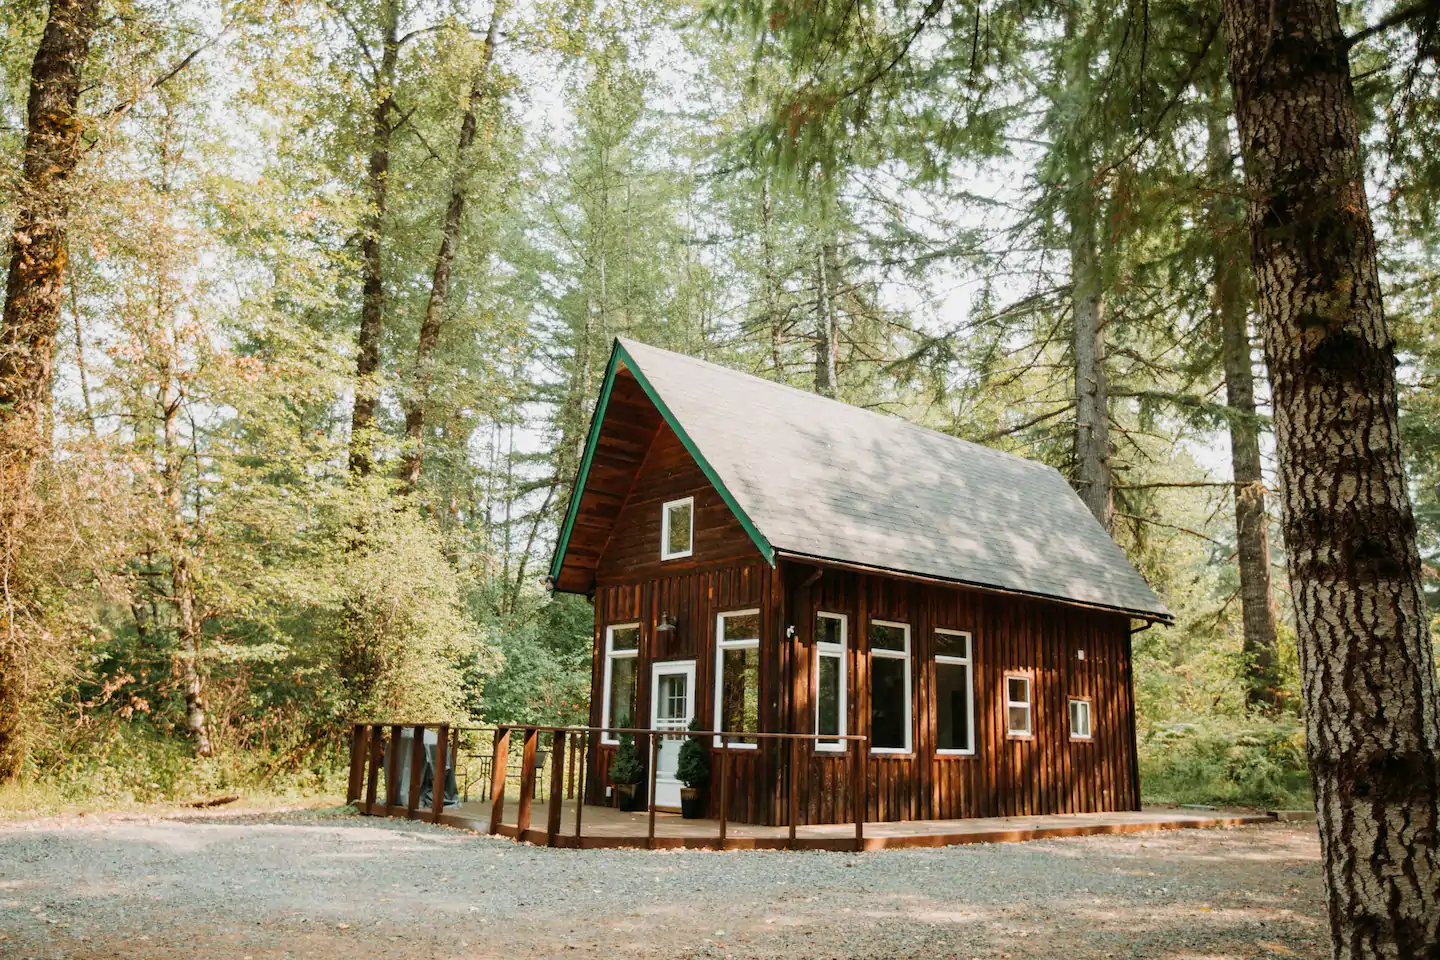 Hera's Chalet Cabin the the PNW